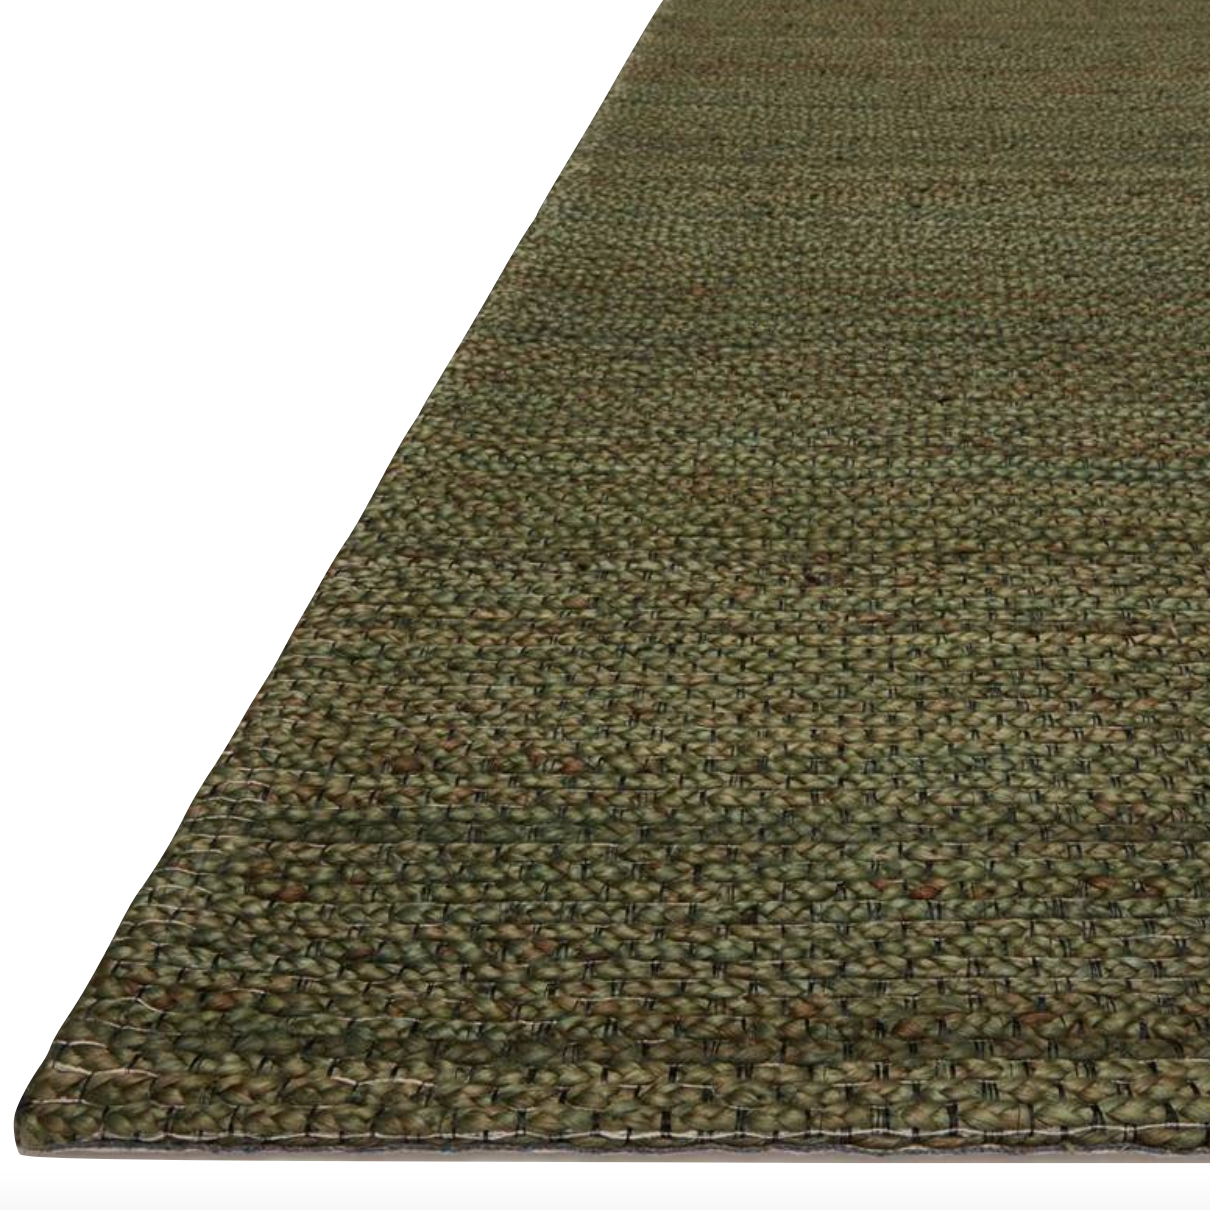 The Lily Green Area Rug is an earthy base that isn't your average jute area rug. The hand-woven collection has an intricate yet subtle textural look that adds an elevated layer to any style. This area rug would be great for living rooms, dining rooms, or other high-traffic areas.   Hand Woven 97% Jute | 3% Other Fiber LIL-01 Green